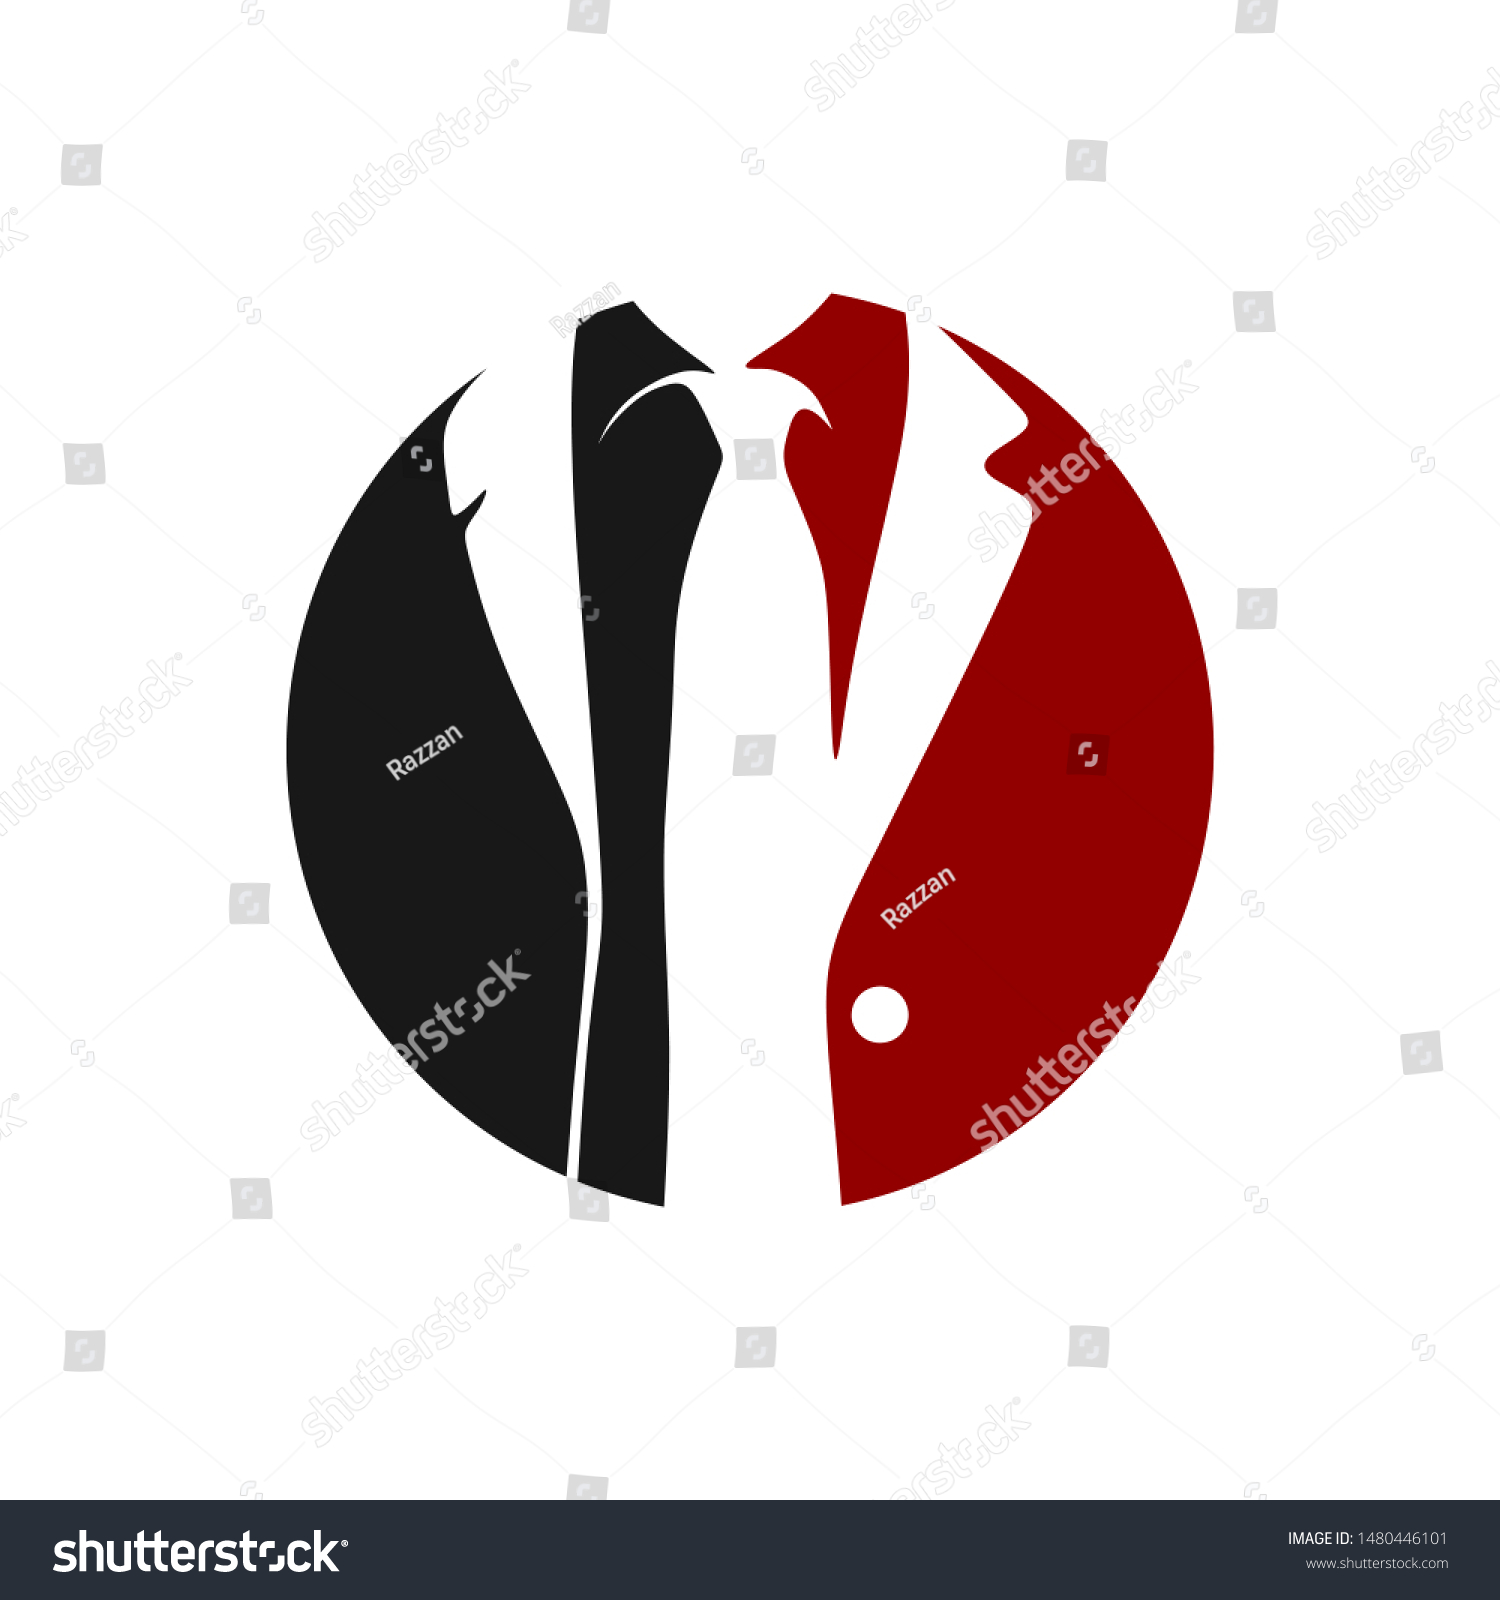 suits and ties red black vector logo. #1480446101